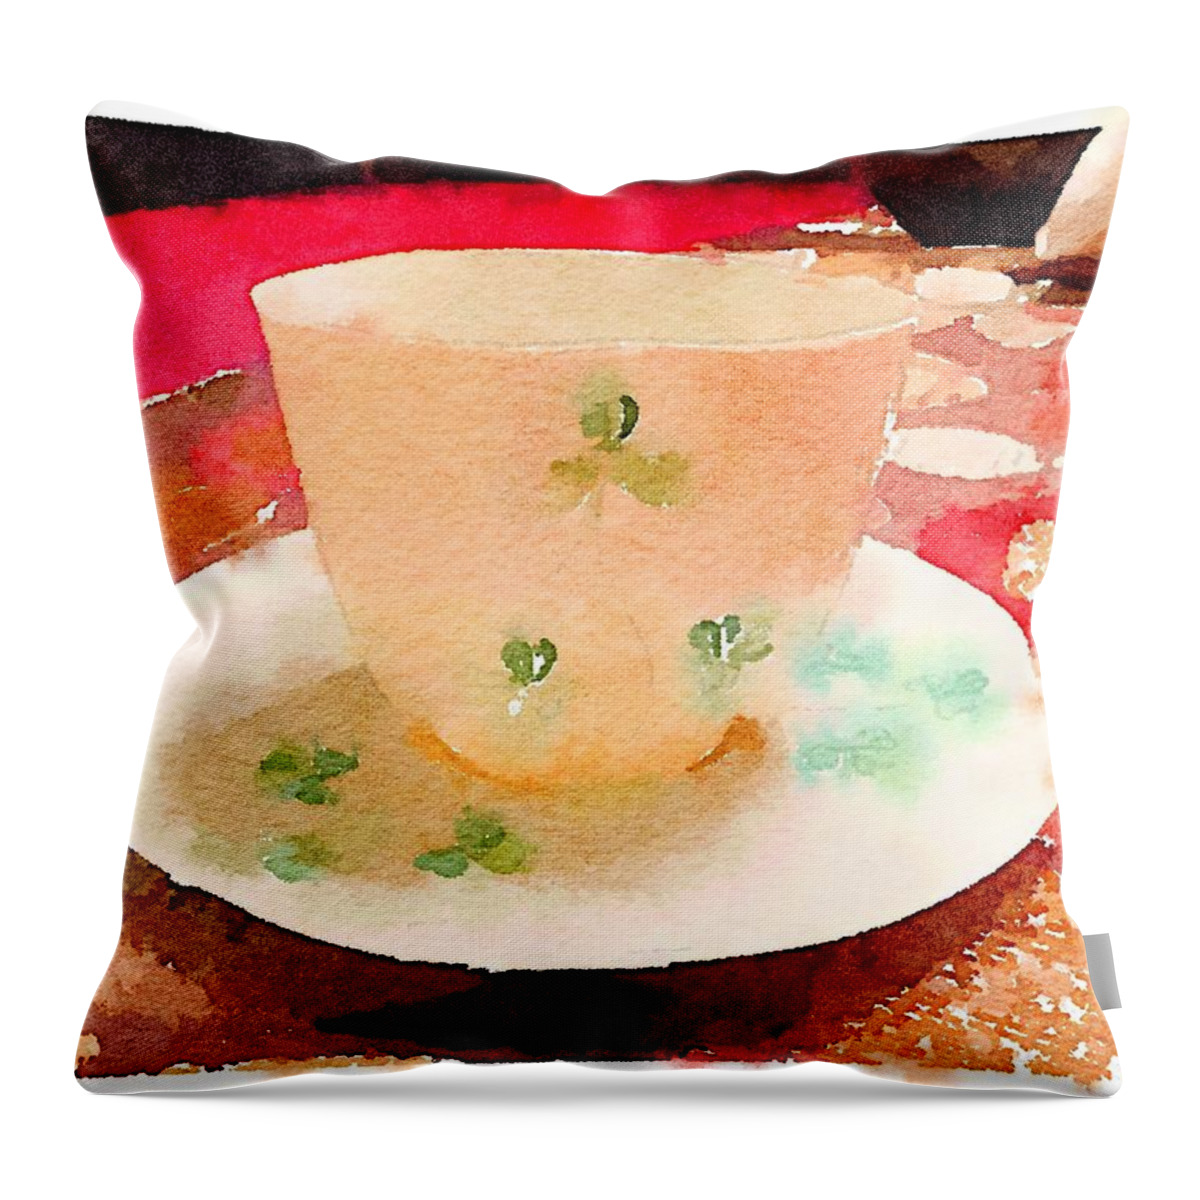 Waterlogue Throw Pillow featuring the digital art Luck Of The Irish by Shannon Grissom